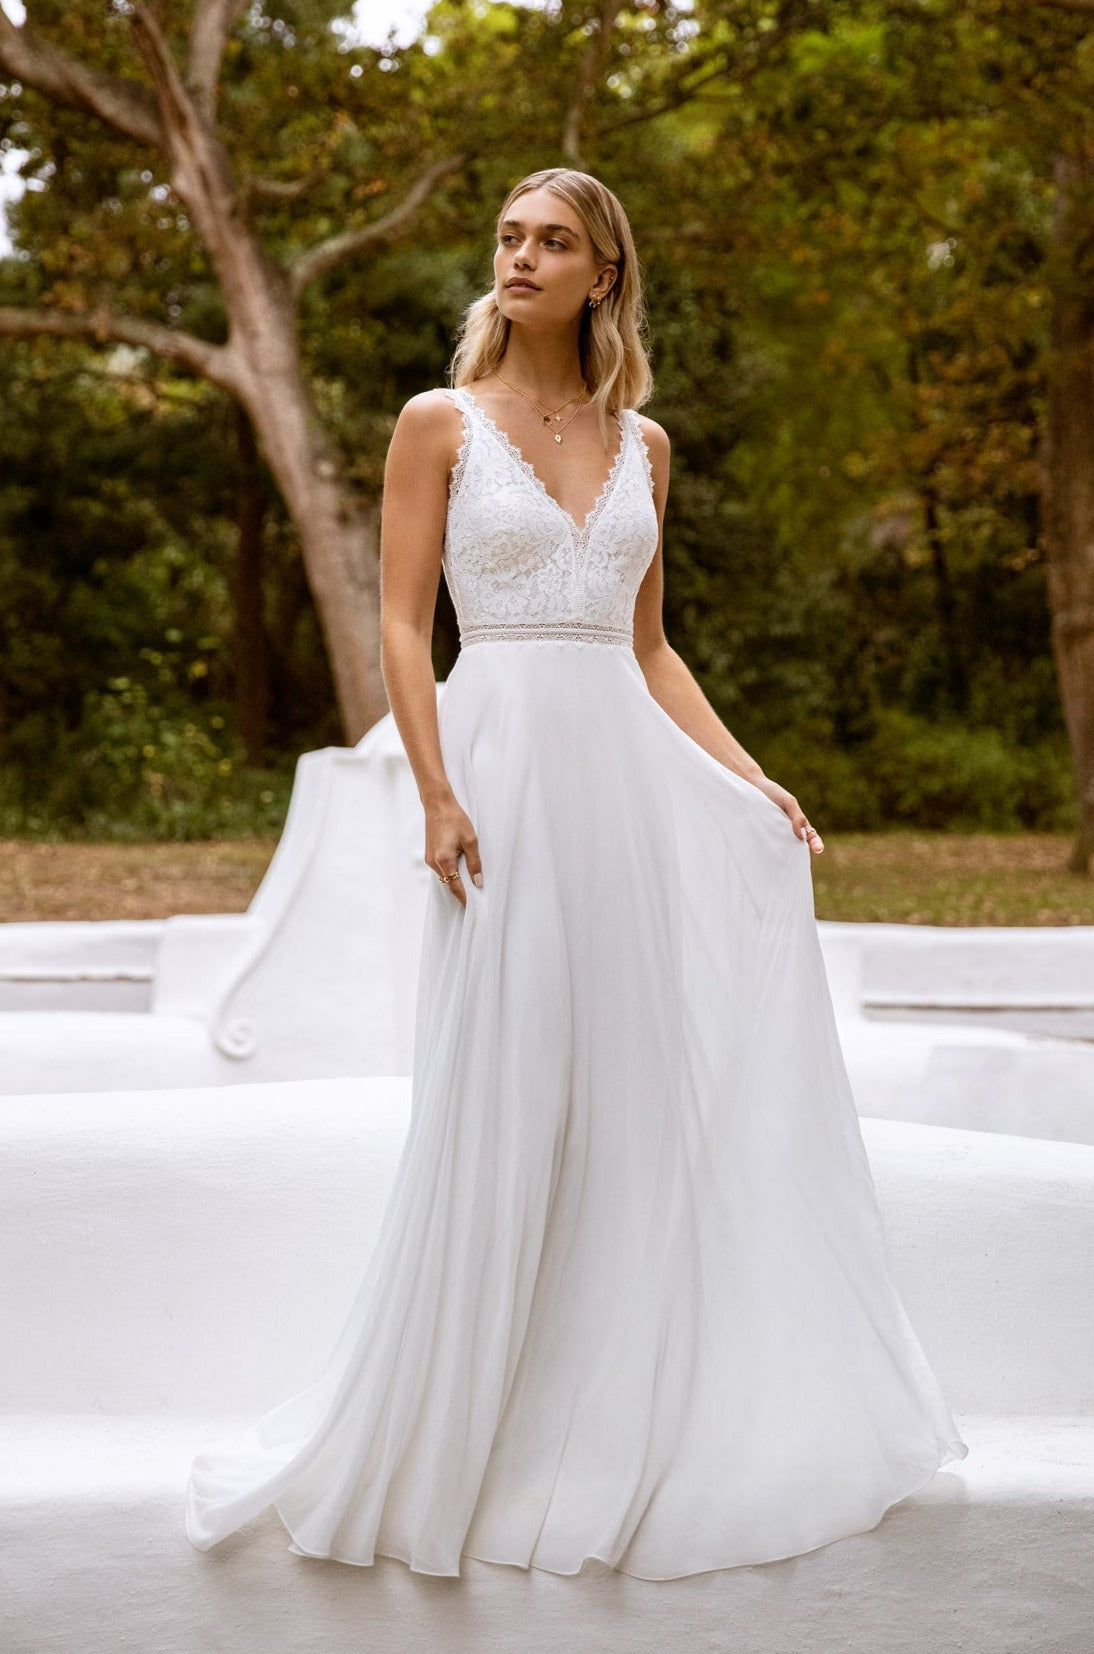 Simple lace and chiffon wedding dress for the relaxed bride. – Kelsey Rose